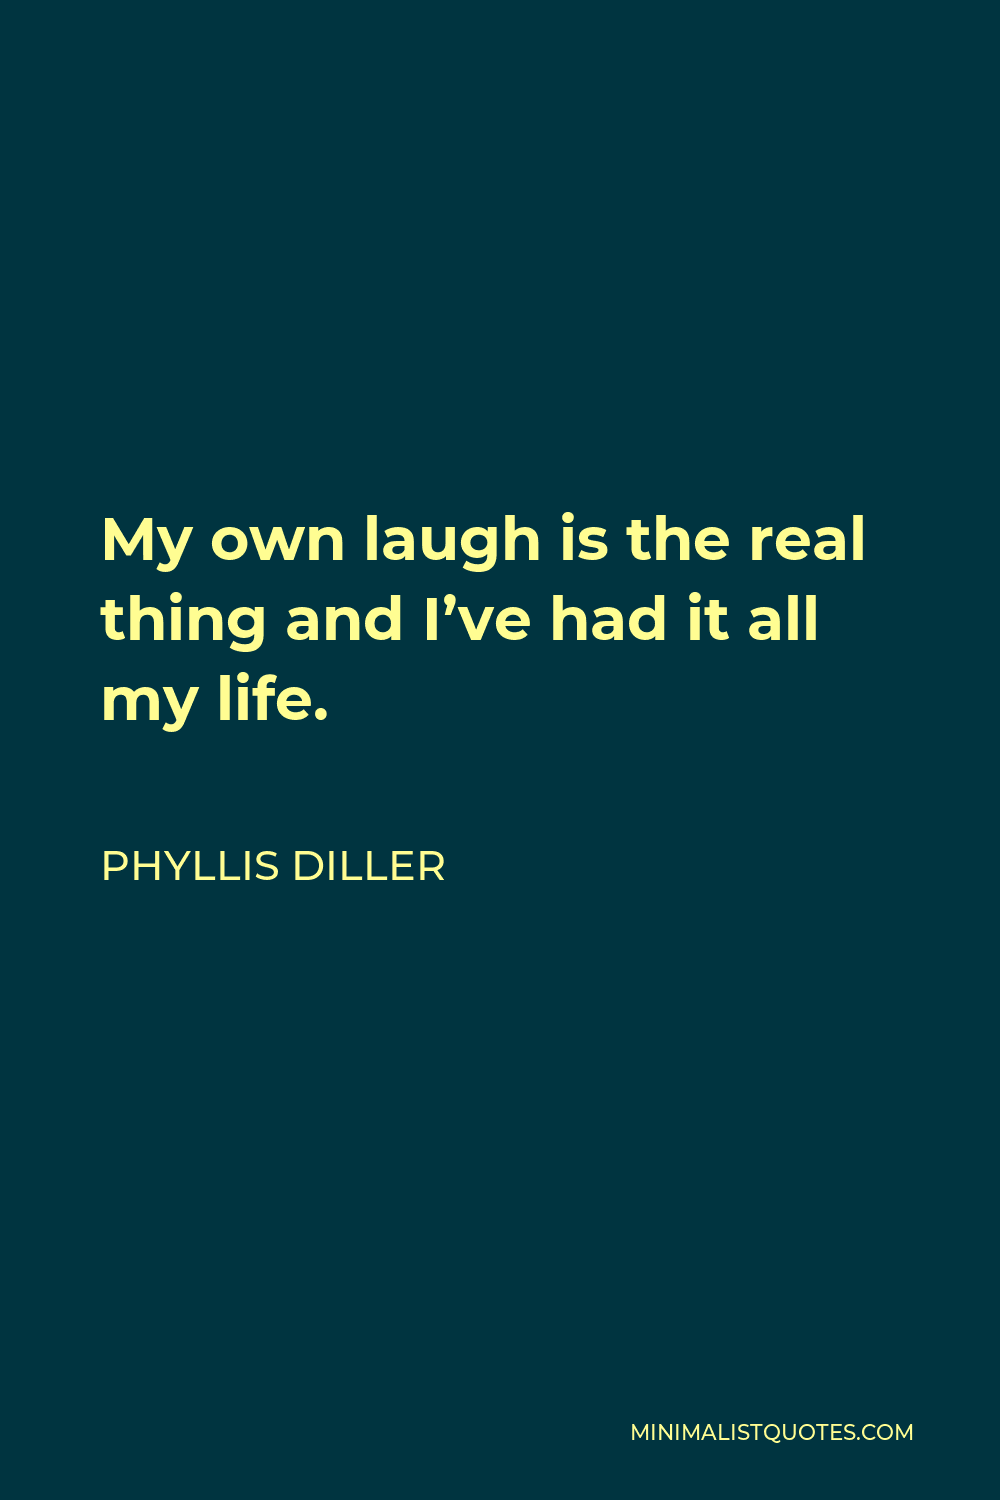 Phyllis Diller Quote - My own laugh is the real thing and I’ve had it all my life.